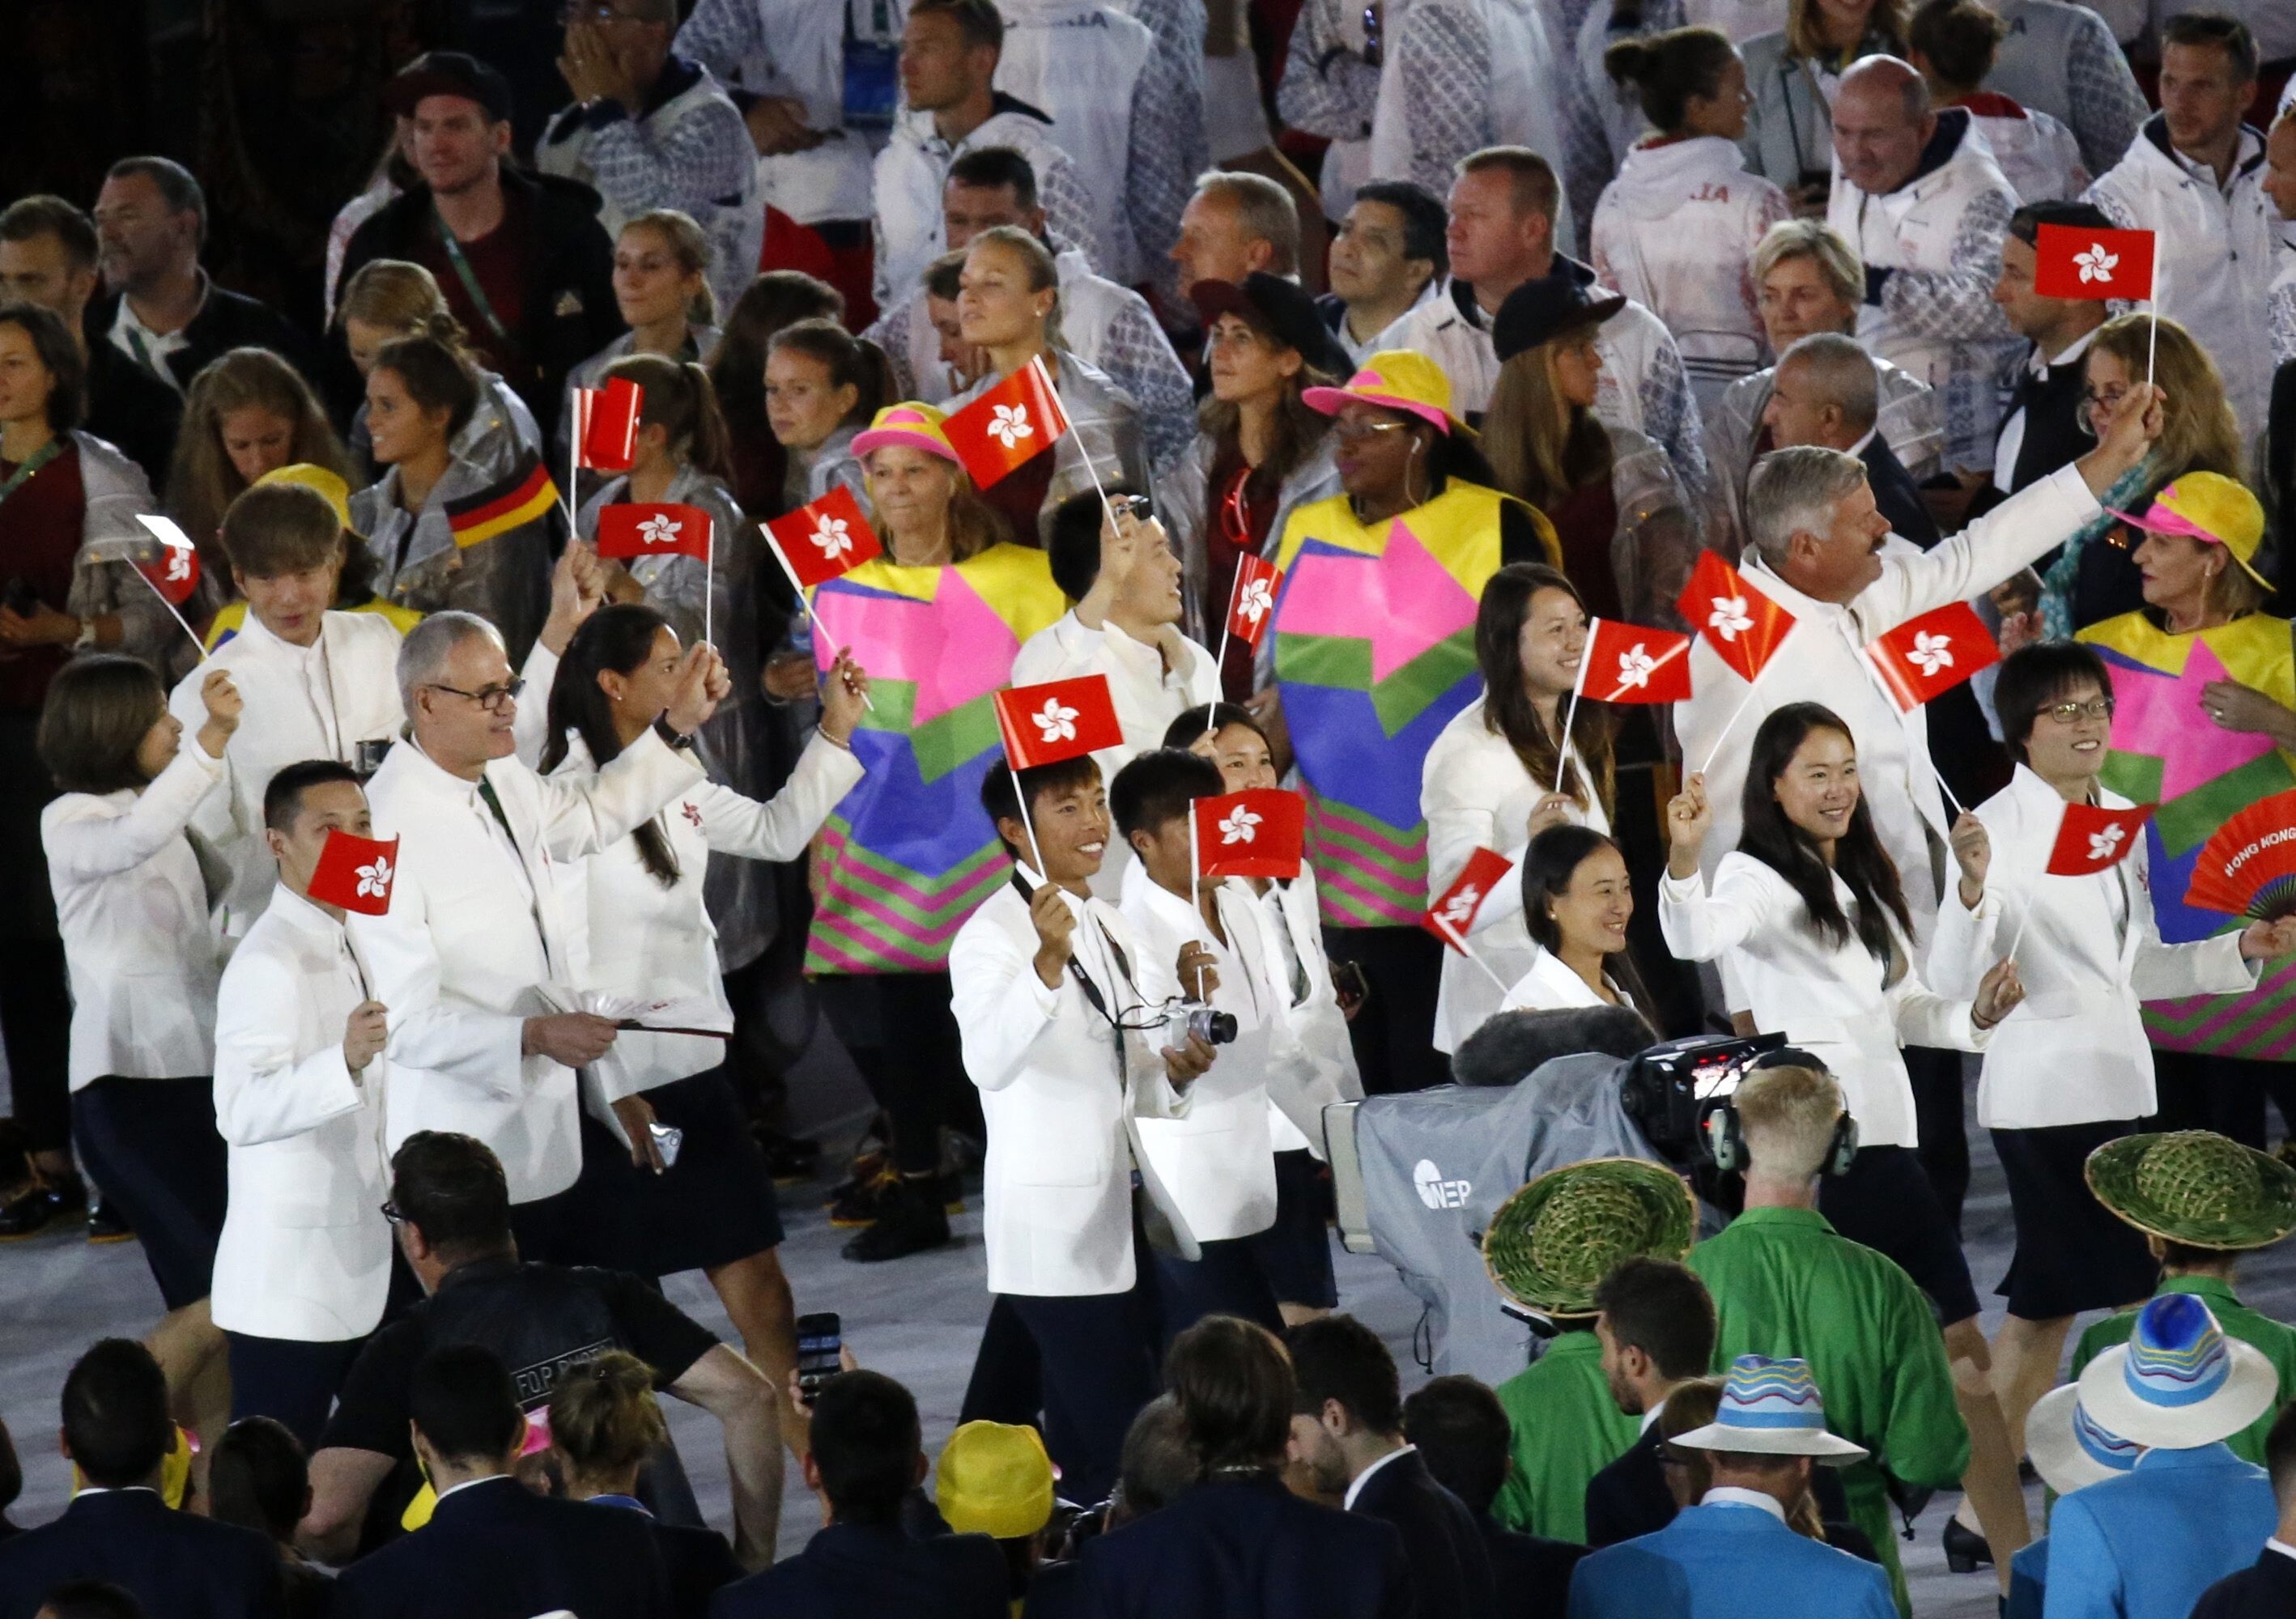 The Hong Kong delegation enters the stadium during the opening ceremony of the Rio Olympic Games, at the Maracana Stadium in Rio de Janeiro, Brazil, on August 5, 2016. Photo: EPA